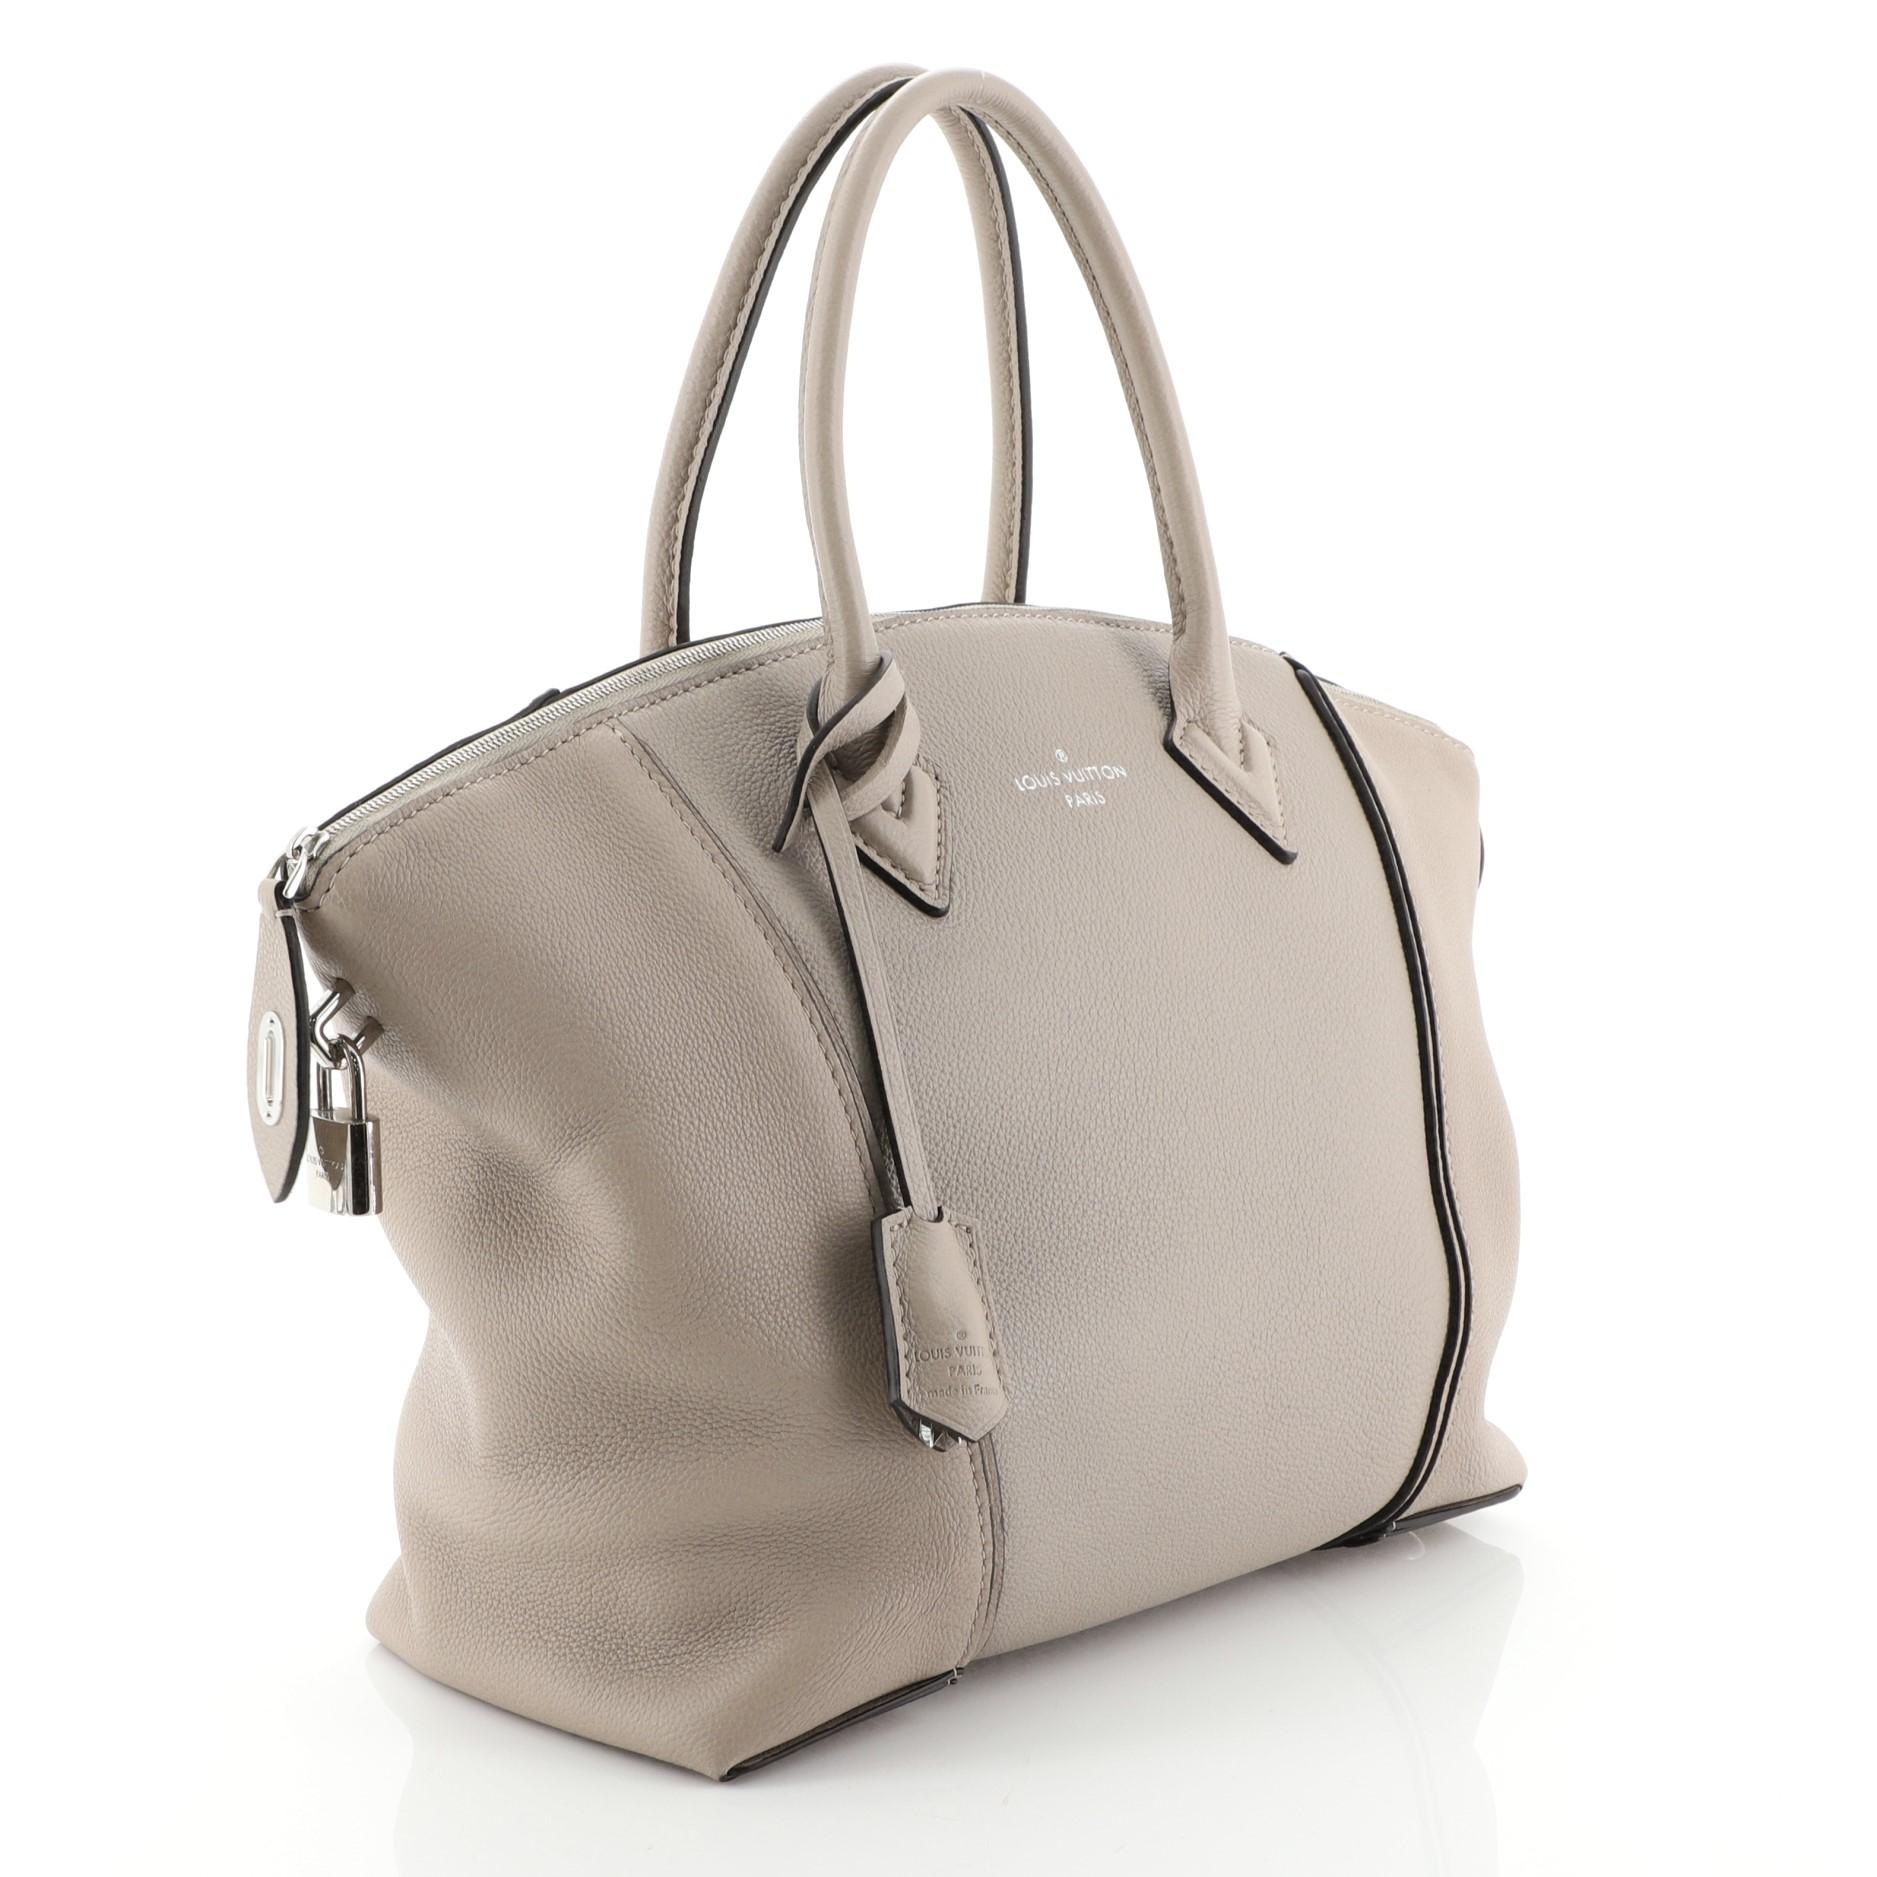 This Louis Vuitton Soft Lockit Handbag Leather PM, crafted from neutral leather, features dual rolled handles, curved top, LV padlock on its side, and silver-tone hardware. Its zip closure opens to a neutral suede interior with zip and slip pockets.